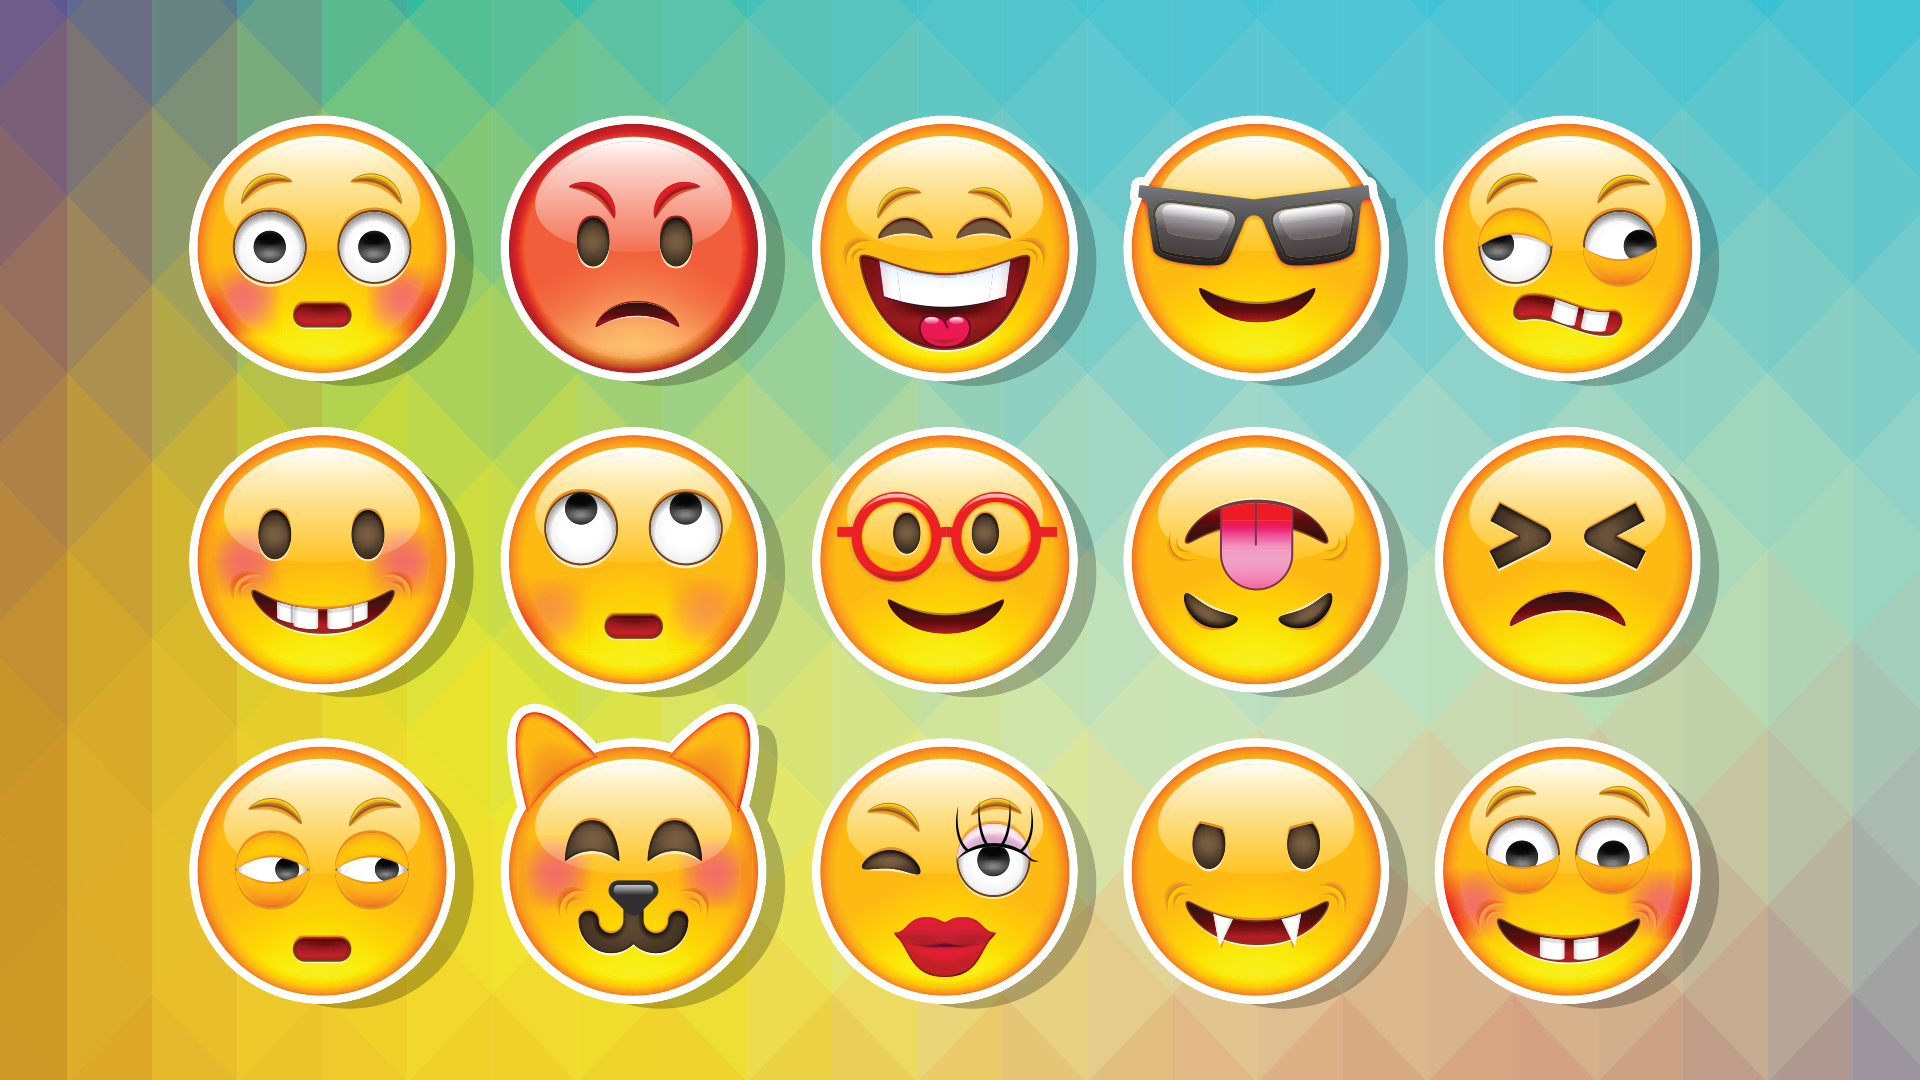 A selection of emojis